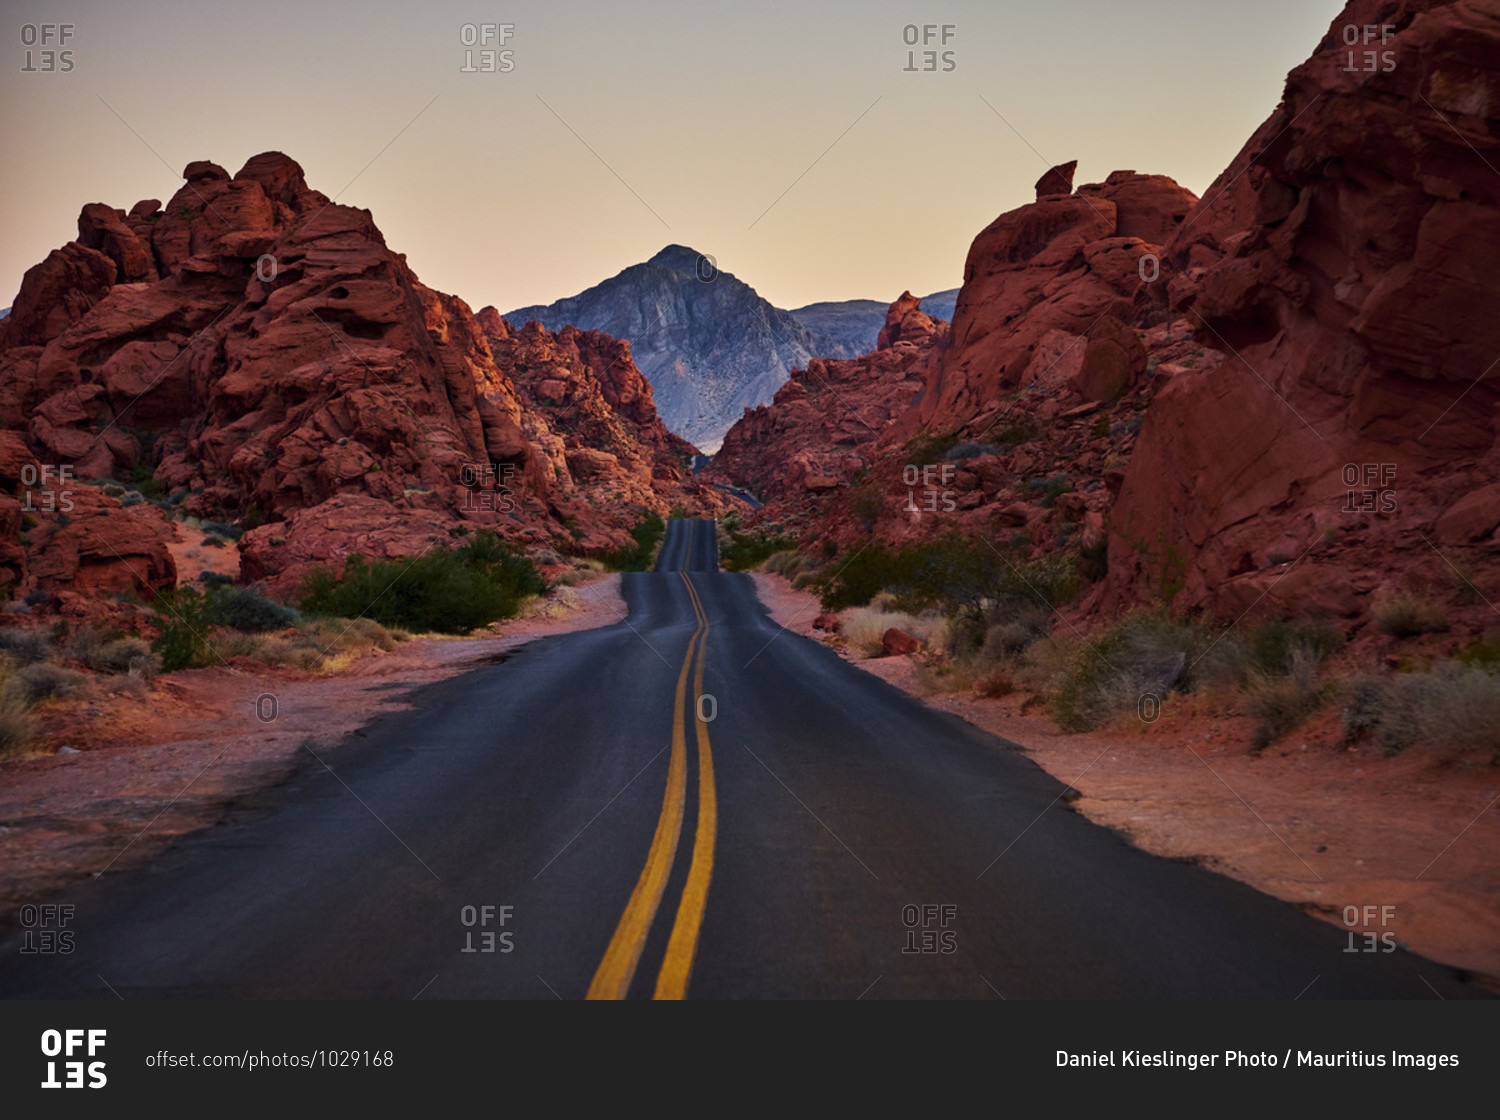 USA, United States of America, Nevada, Valley of Fire, National Park, Mouse Tank Road, Sierra Nevada, California